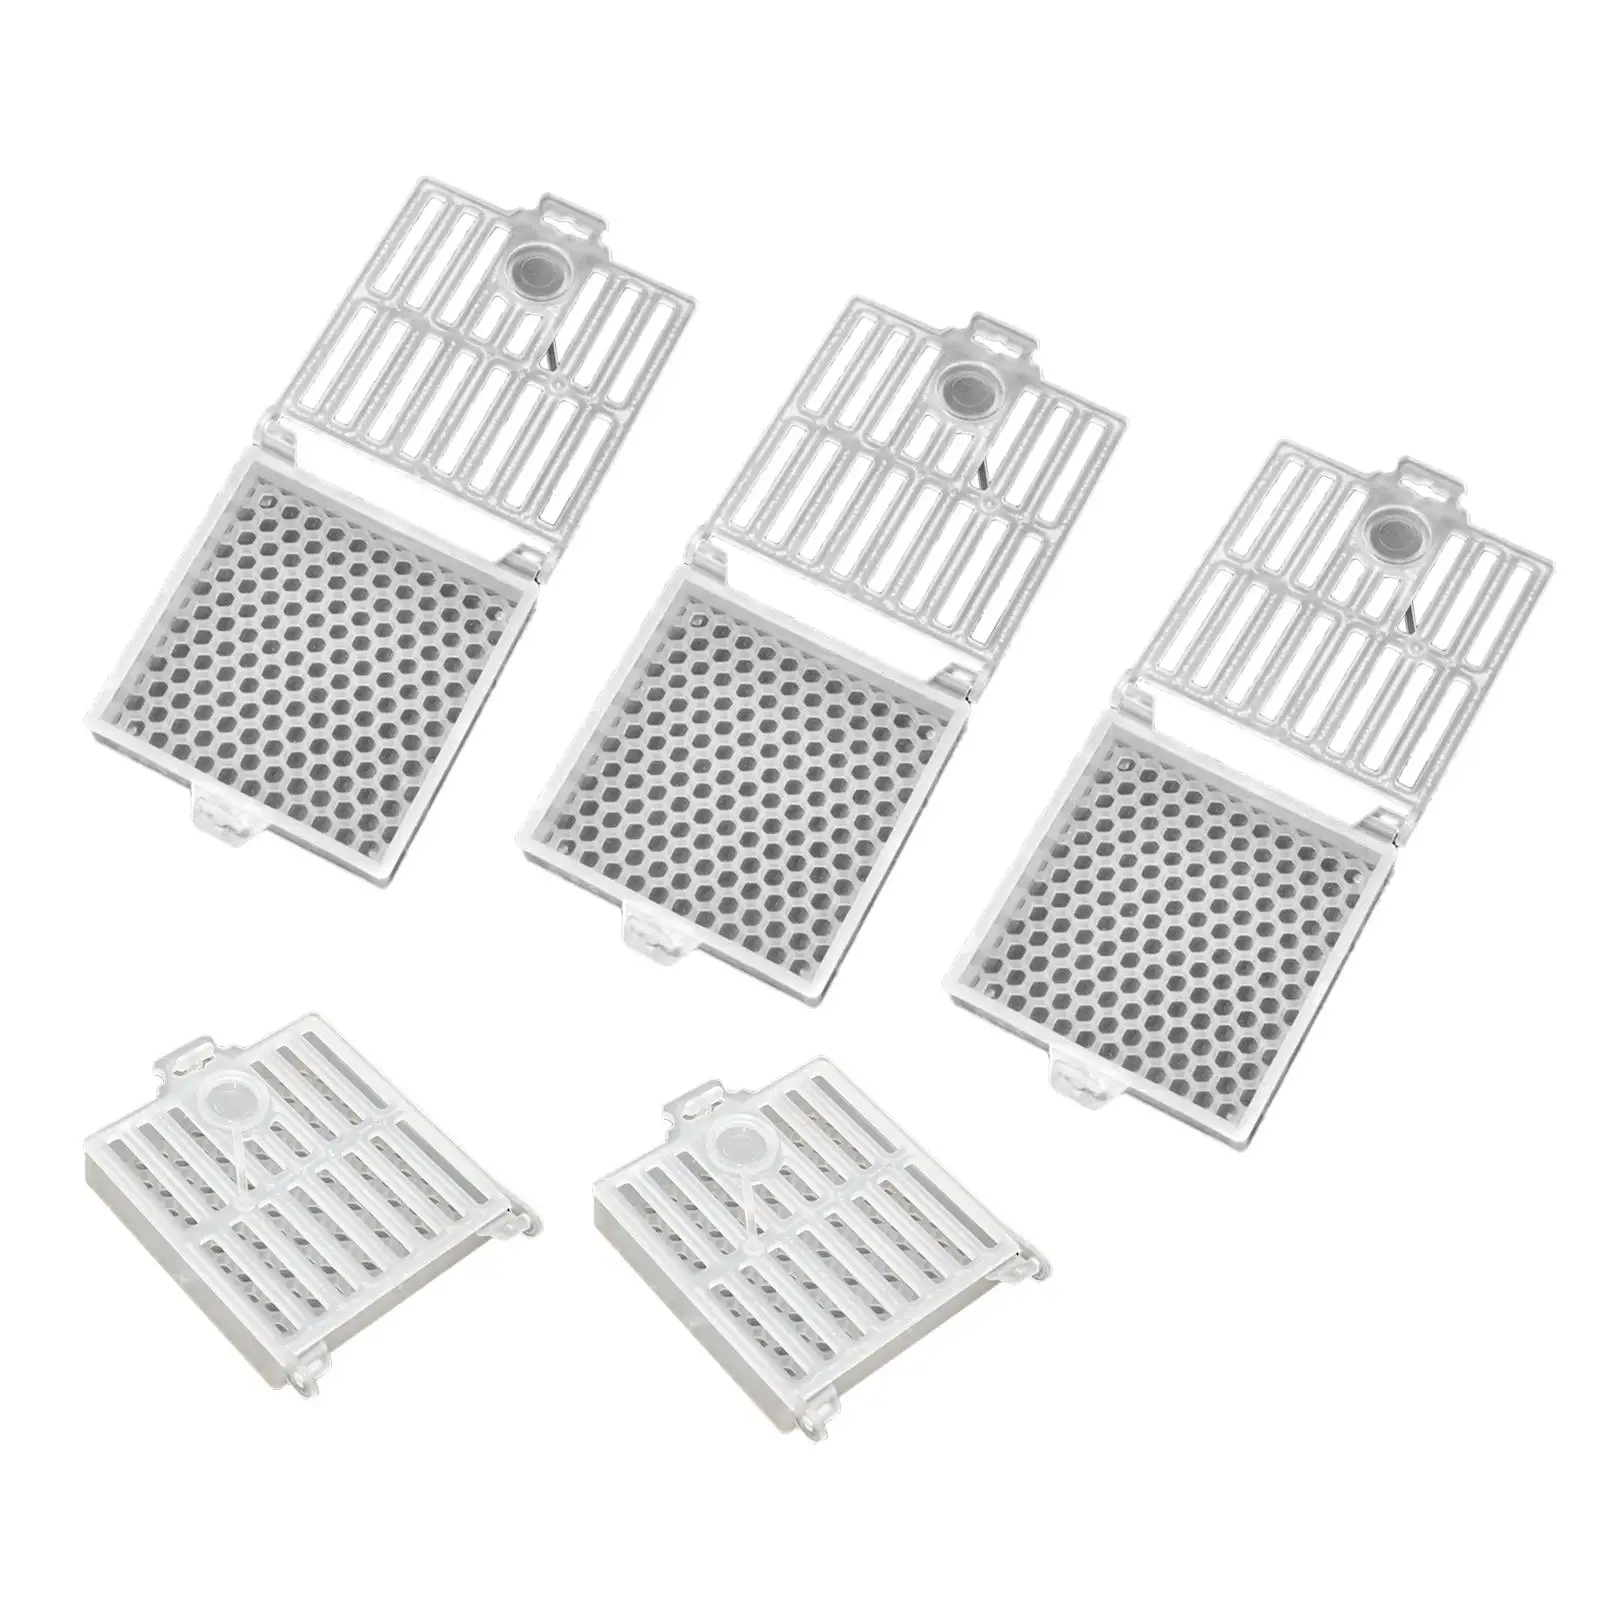 5 Pieces Queen Bee Post Cage Clip ABS Move Transmit Beekeeping Supplies Box